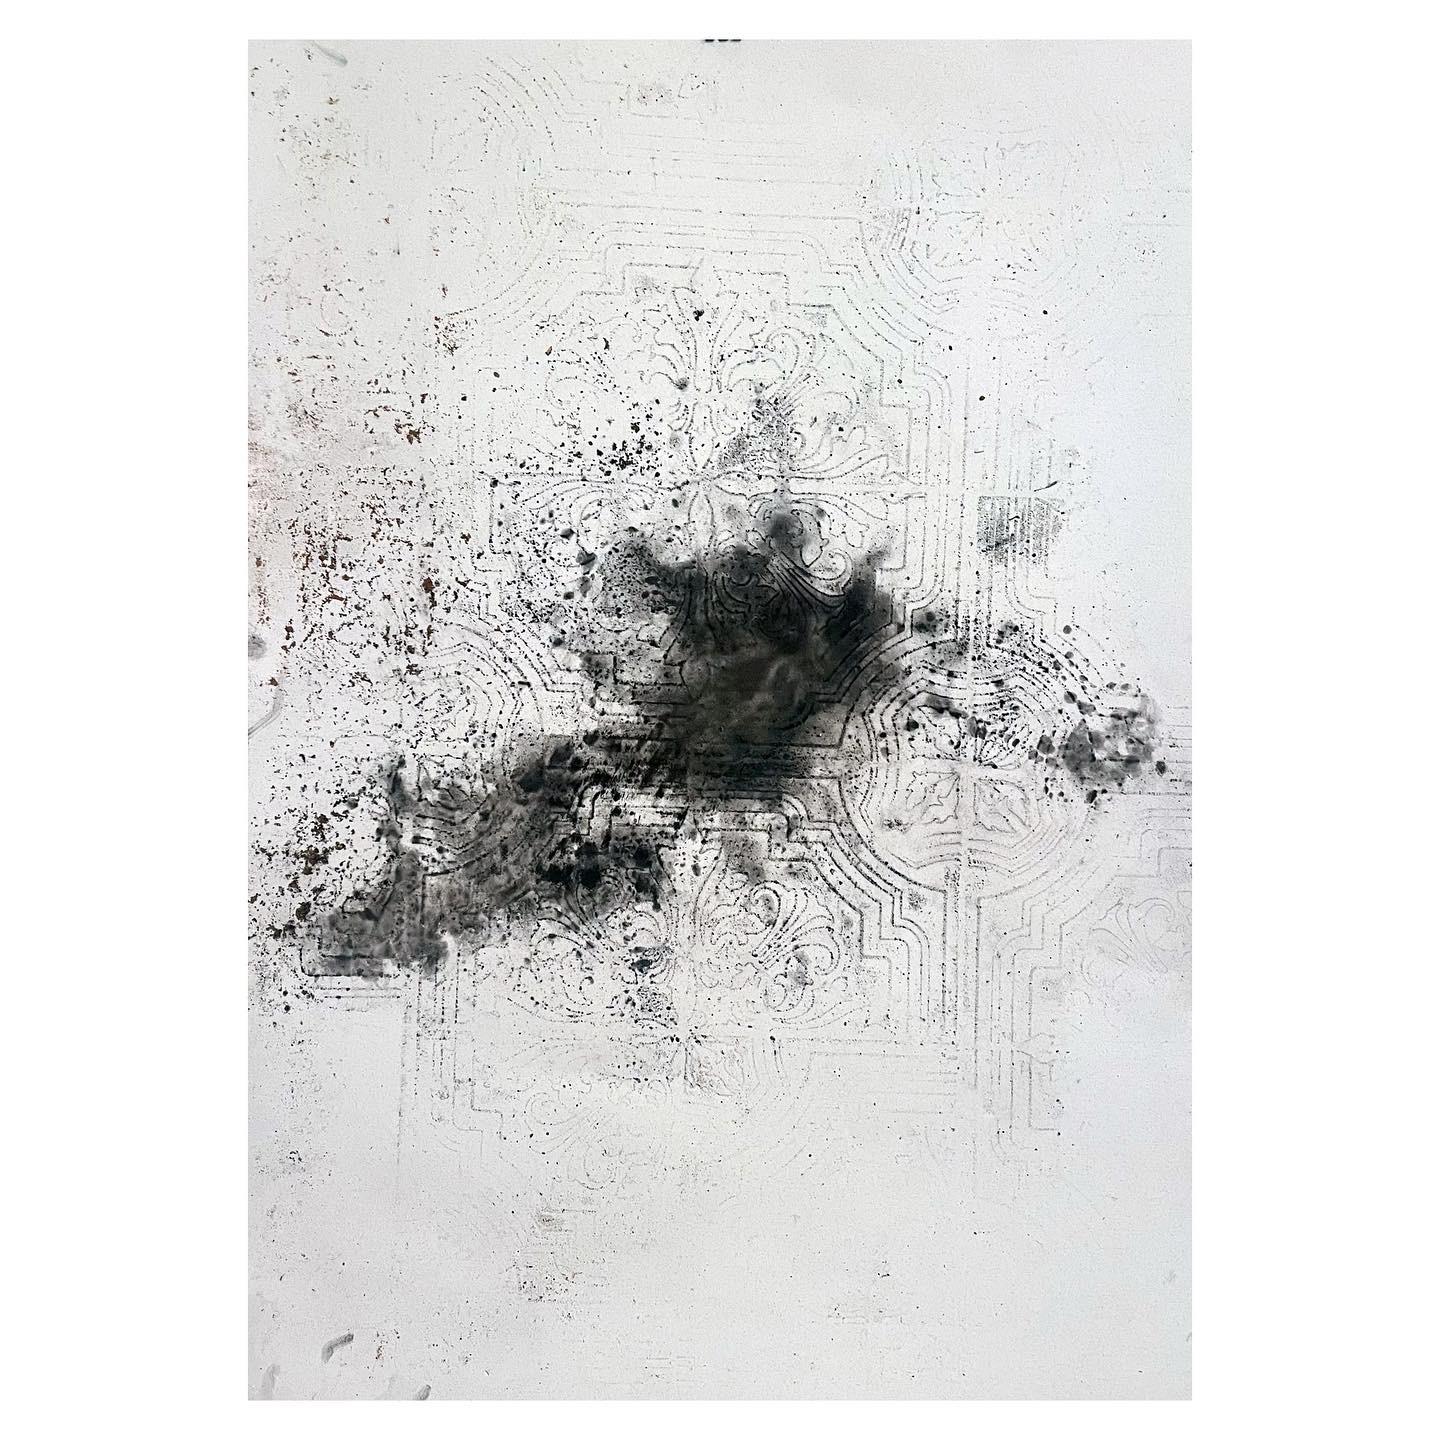 Traces
Frammenti
Mineral Oxide on Paper (Fabriano Elle)
100x70 cm 
2023


Marilina Marchica's research delves into the relationship between Man and Nature and the emotional implications of the relationship between human and dwelling. In this